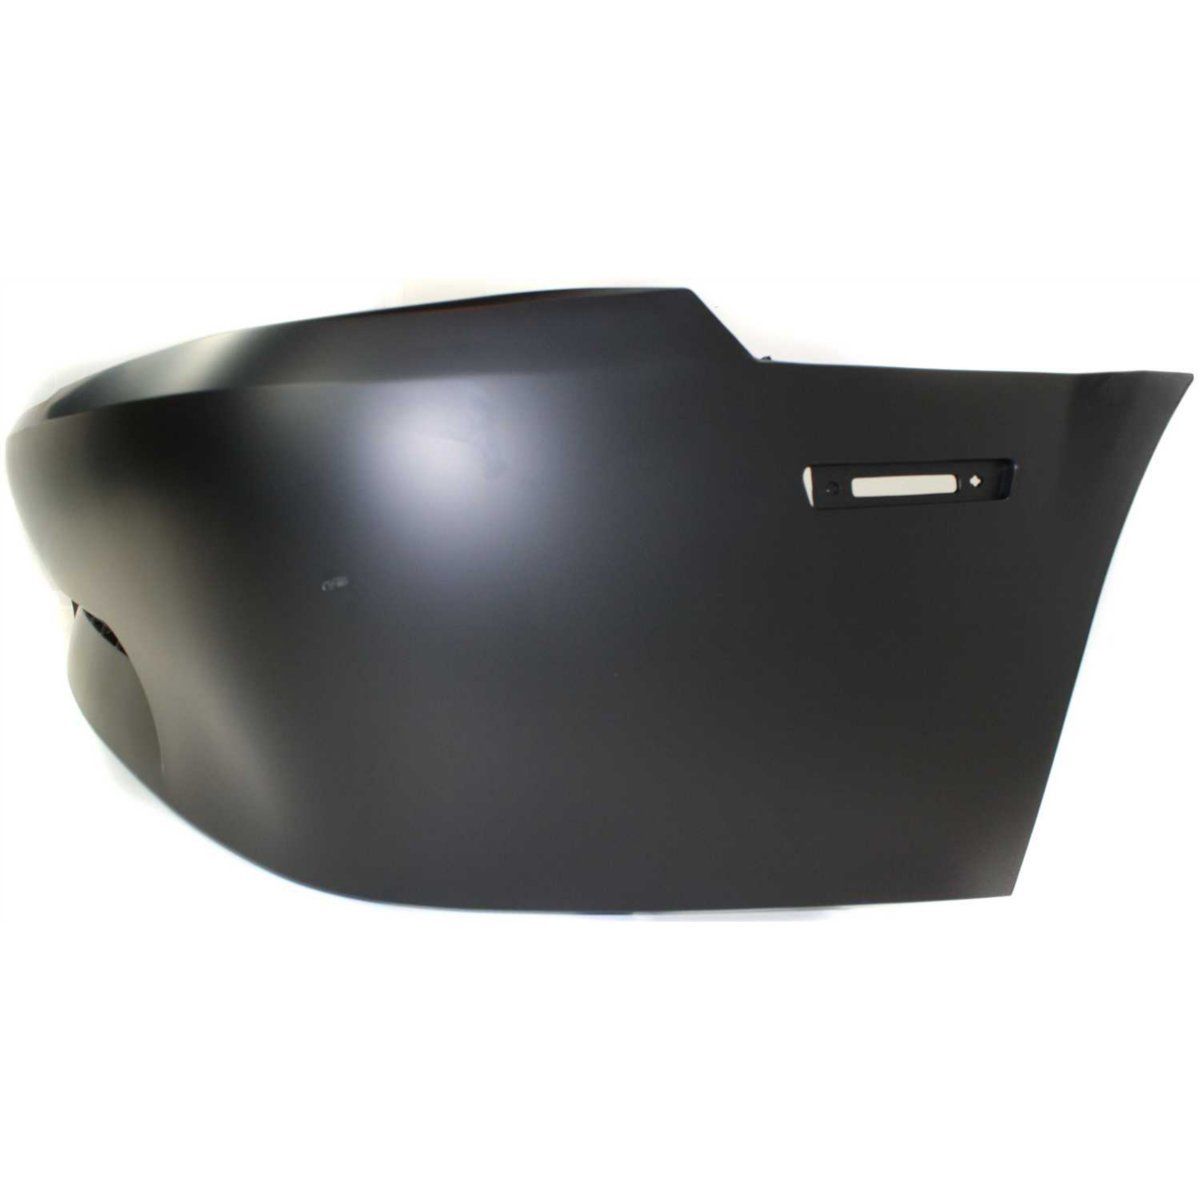 1999-2004 FORD MUSTANG Rear Bumper Cover w/3.8L V6 engine  base model Painted to Match